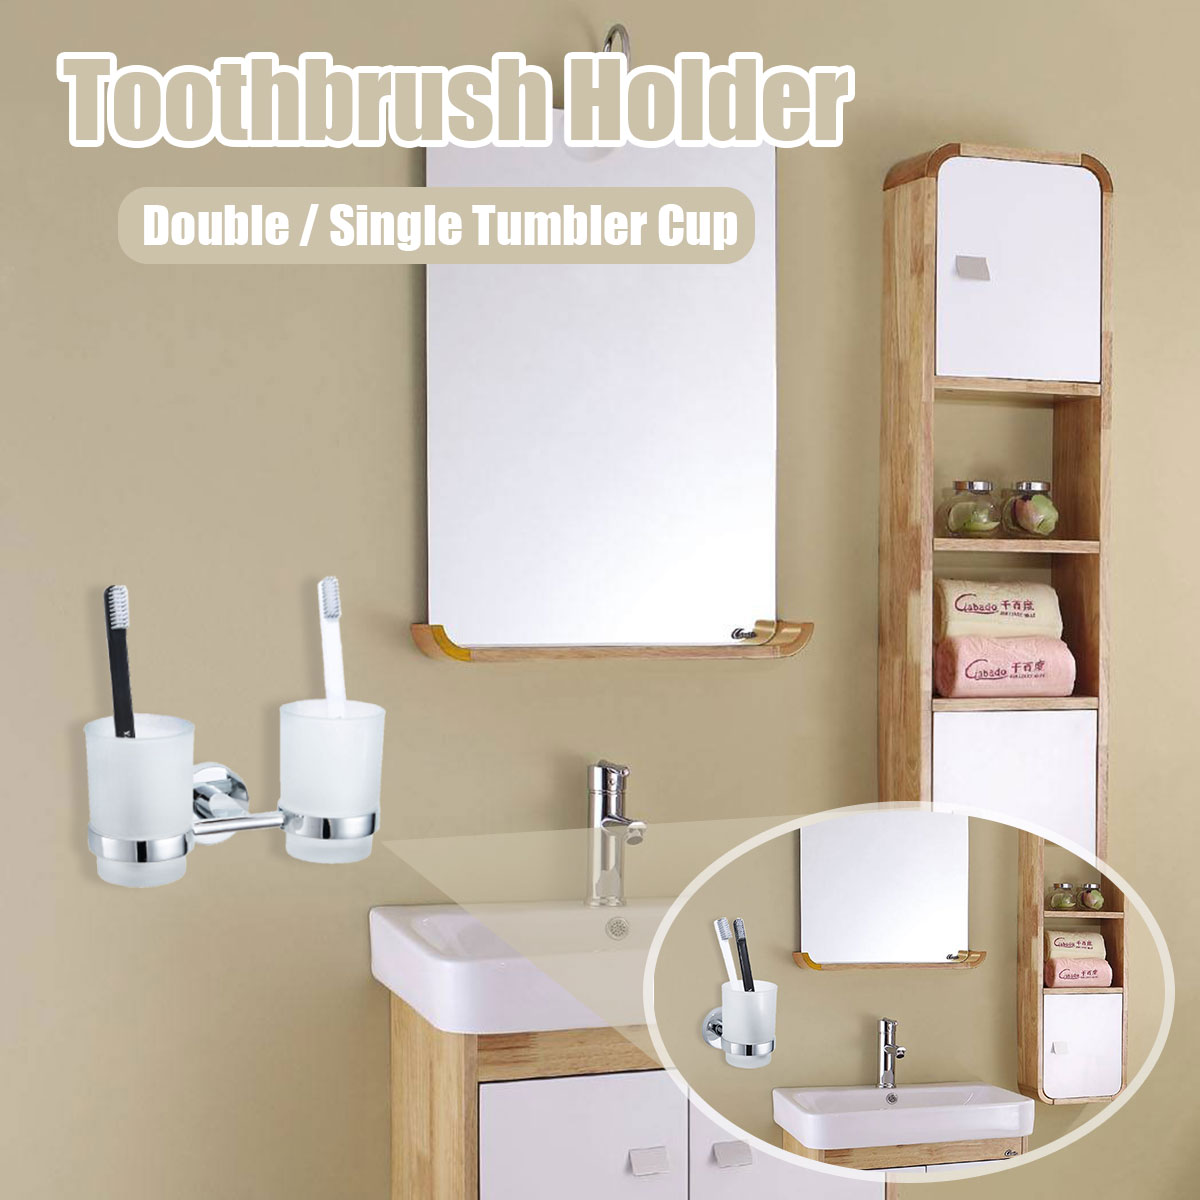 SingleDouble-Tumbler-Cup-Stainless-Steel-Toothbrush-Cup-Holder-Wall-Mounted-Toothbrush-Storage-for-B-1690420-1